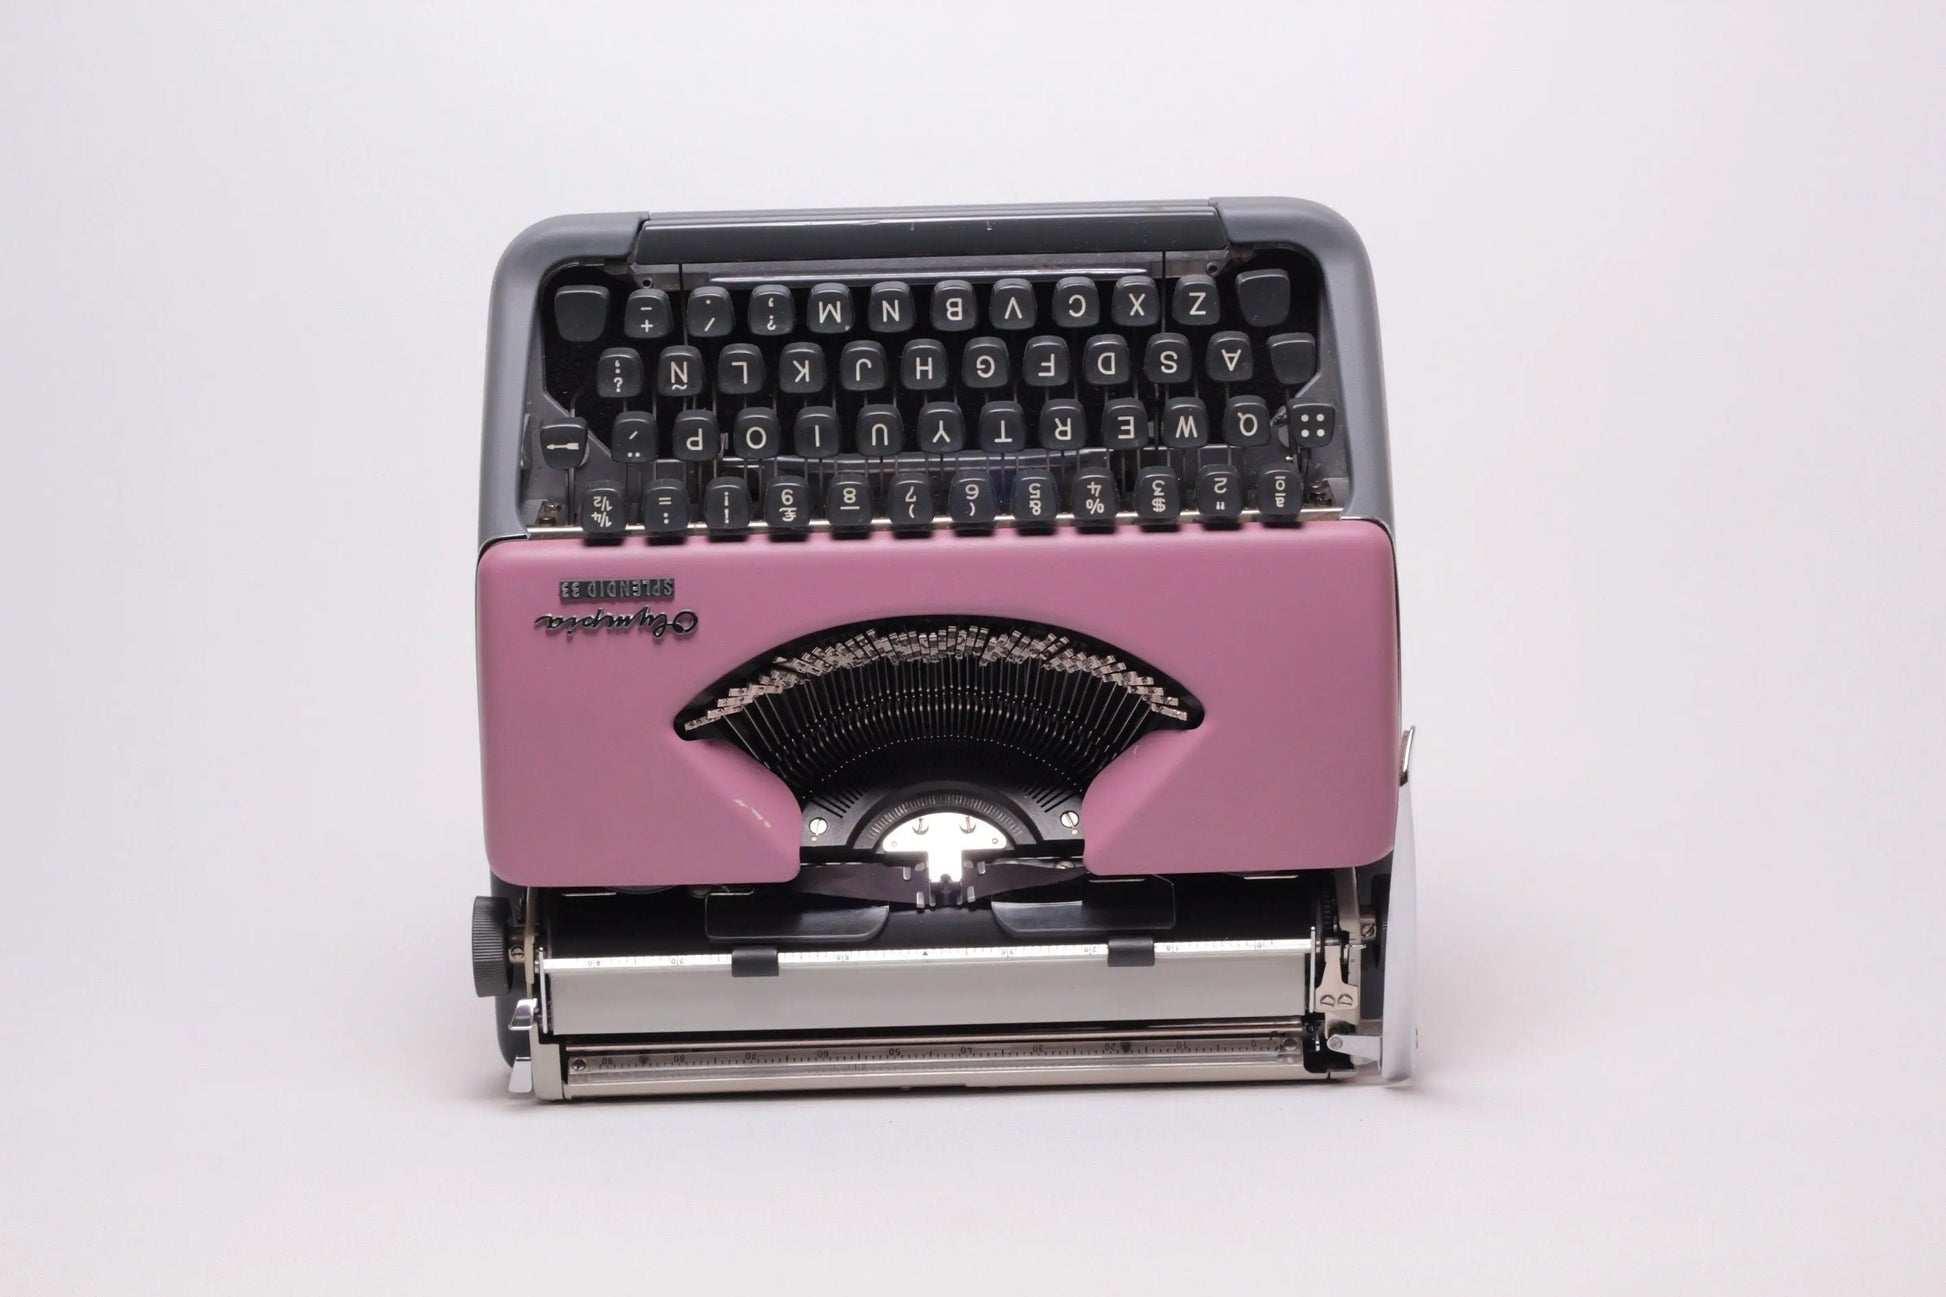 Olympia Splendid 33 Lila/Violet Typewriter, Vintage, Mint Condition, Manual Portable, Professionally Serviced by Typewriter.Company - ElGranero Typewriter.Company